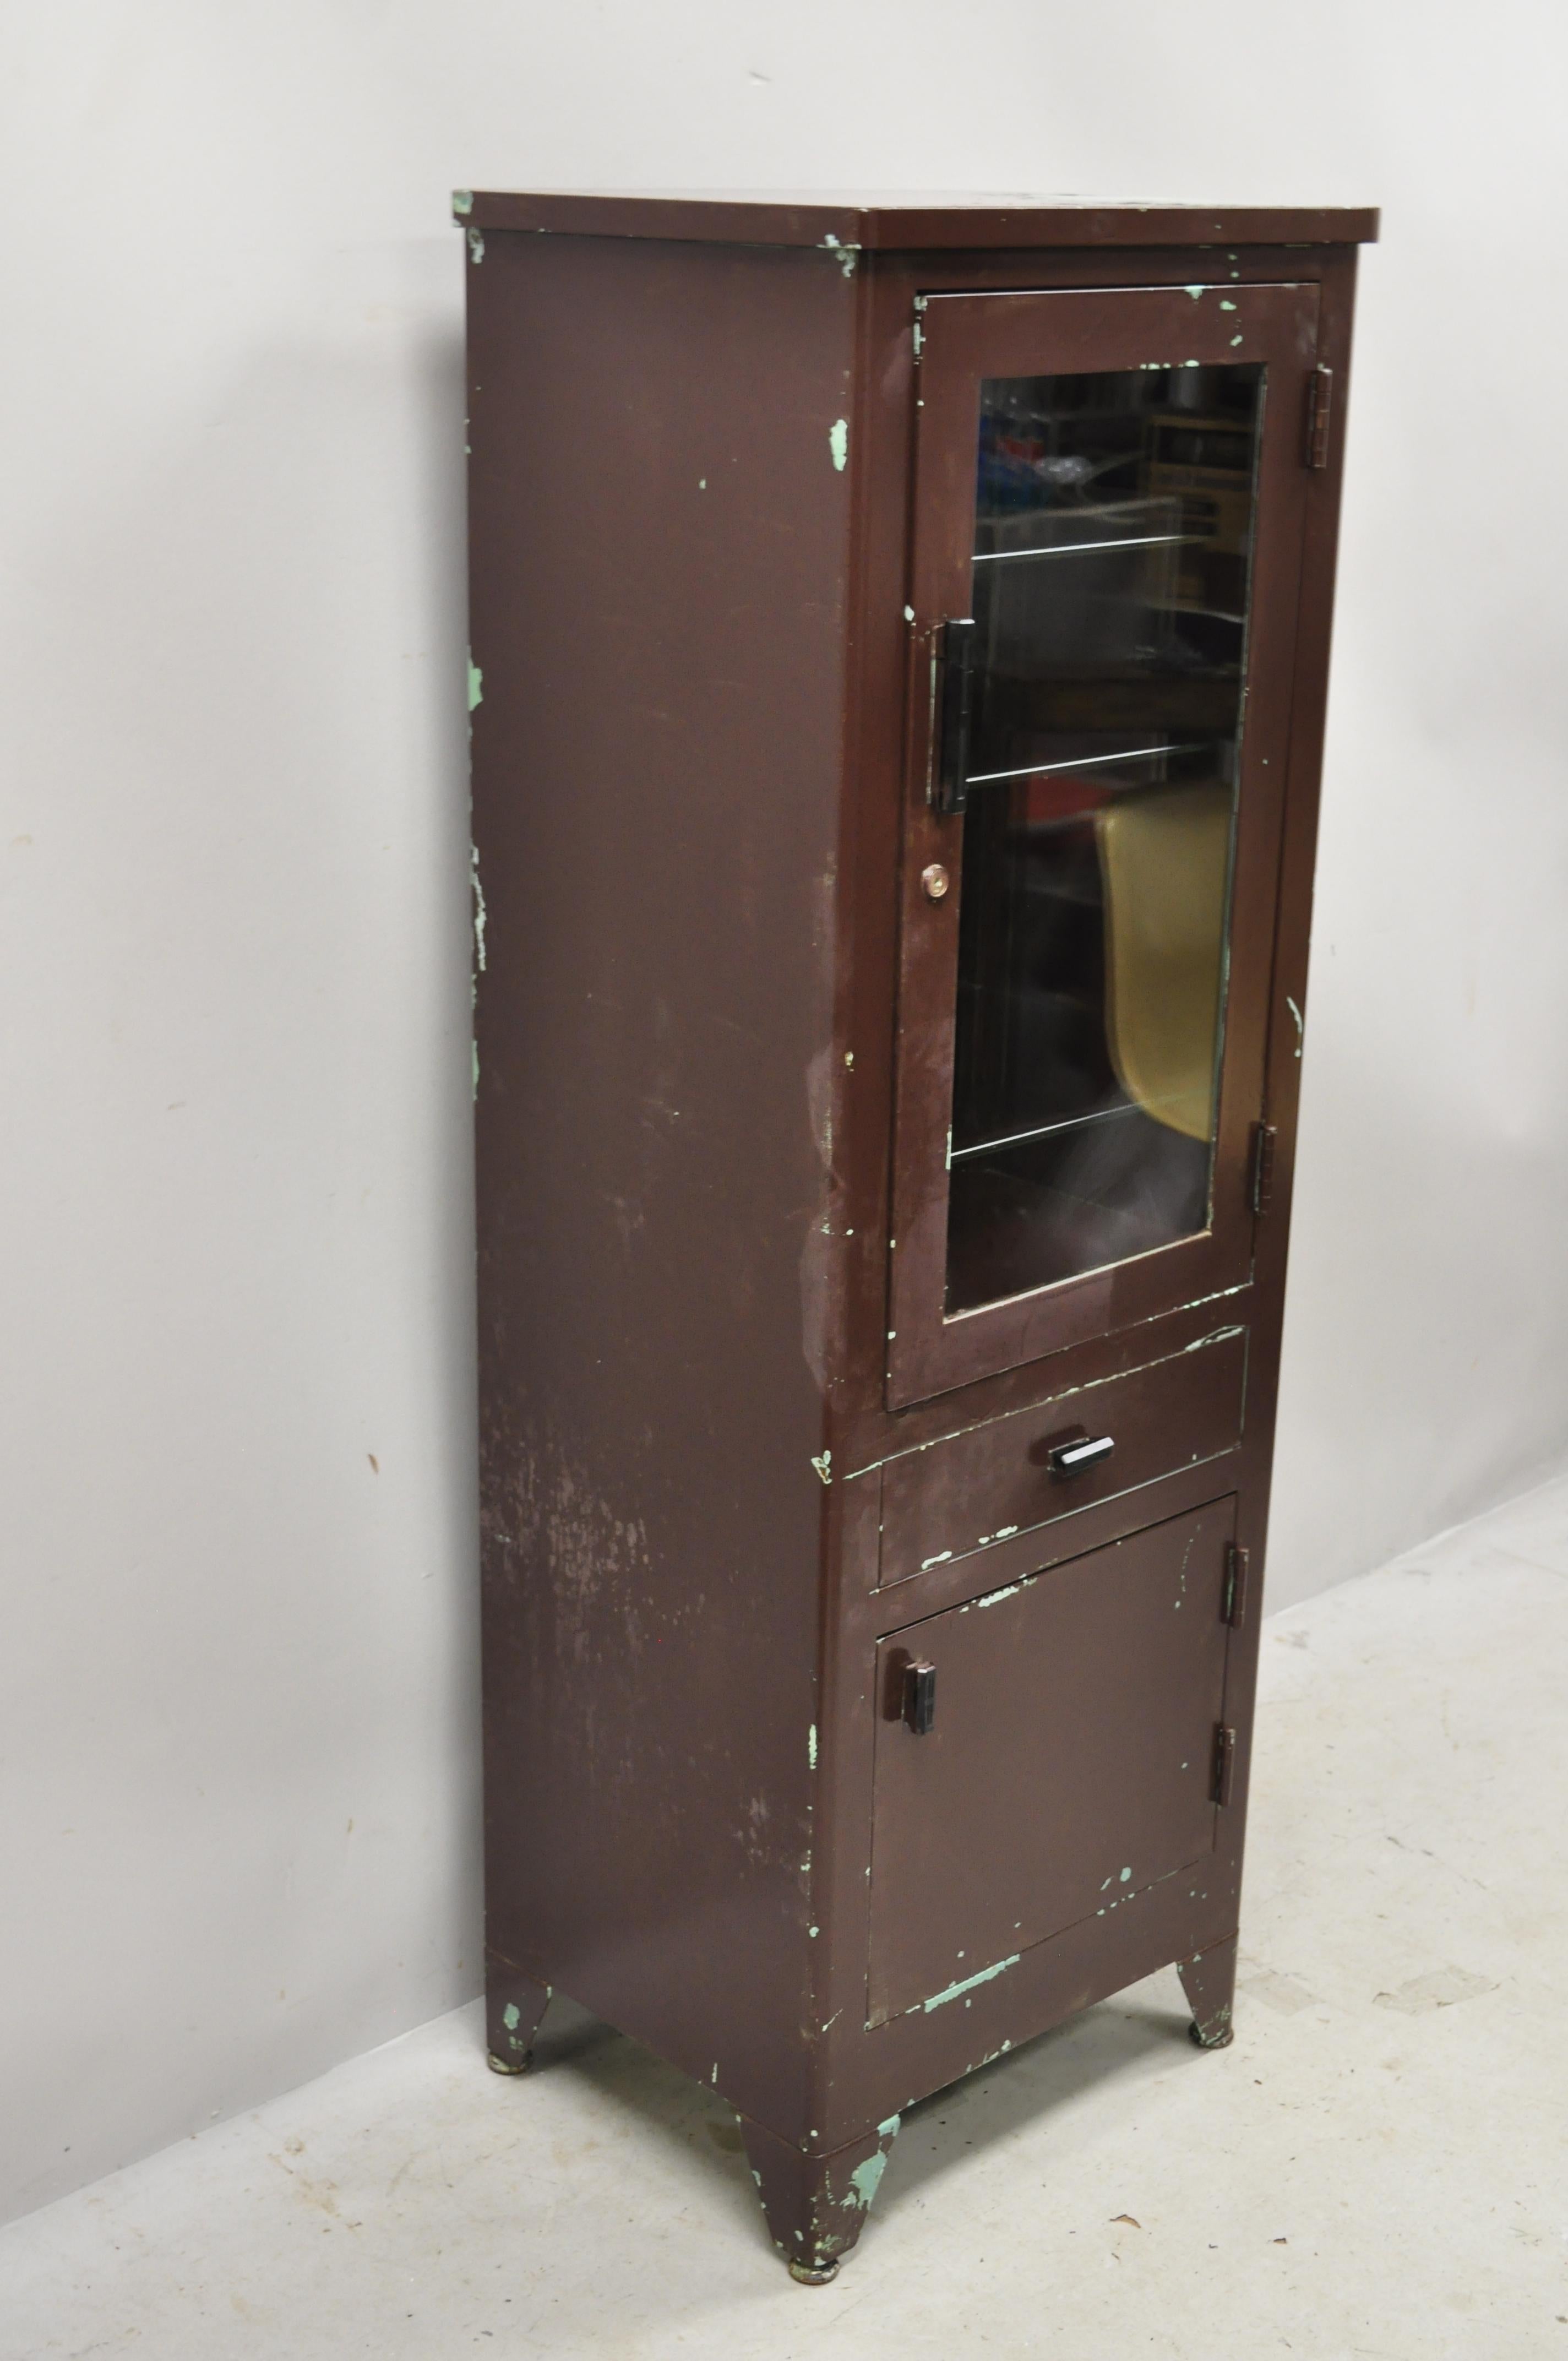 Vintage American Industrial steel metal narrow medical dental bathroom cabinet. Item features 3 glass shelves with rounded edges, nice narrow size, 2 swing doors, 1 drawer, very nice vintage item, quality American craftsmanship, circa mid-20th